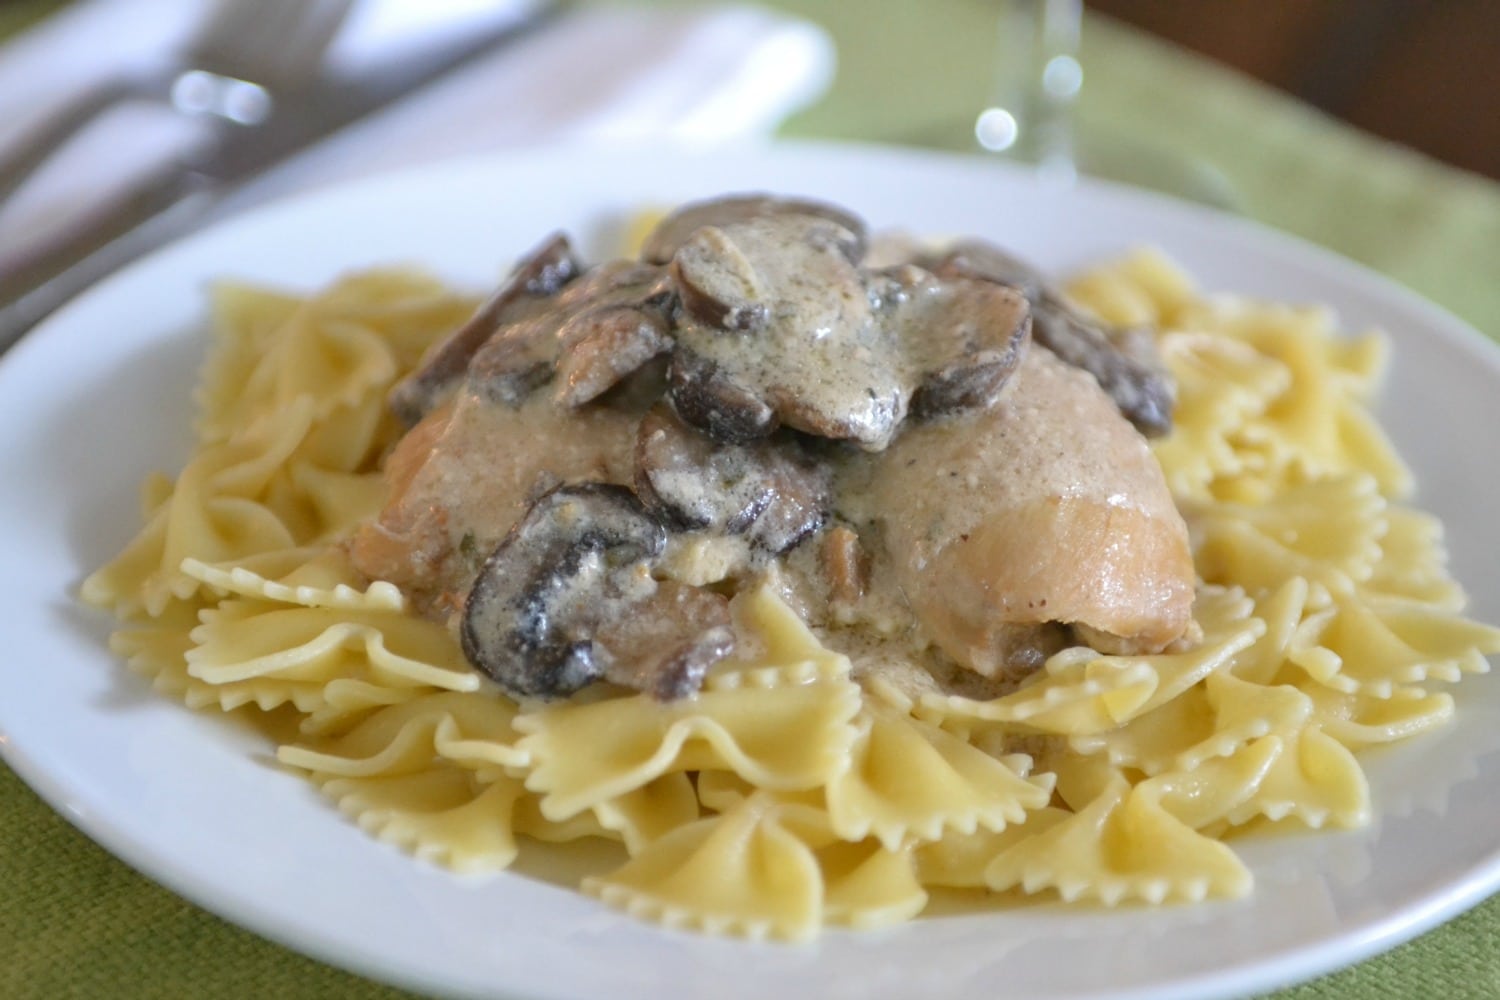 Once cooked, serve portobello chicken over noodles.